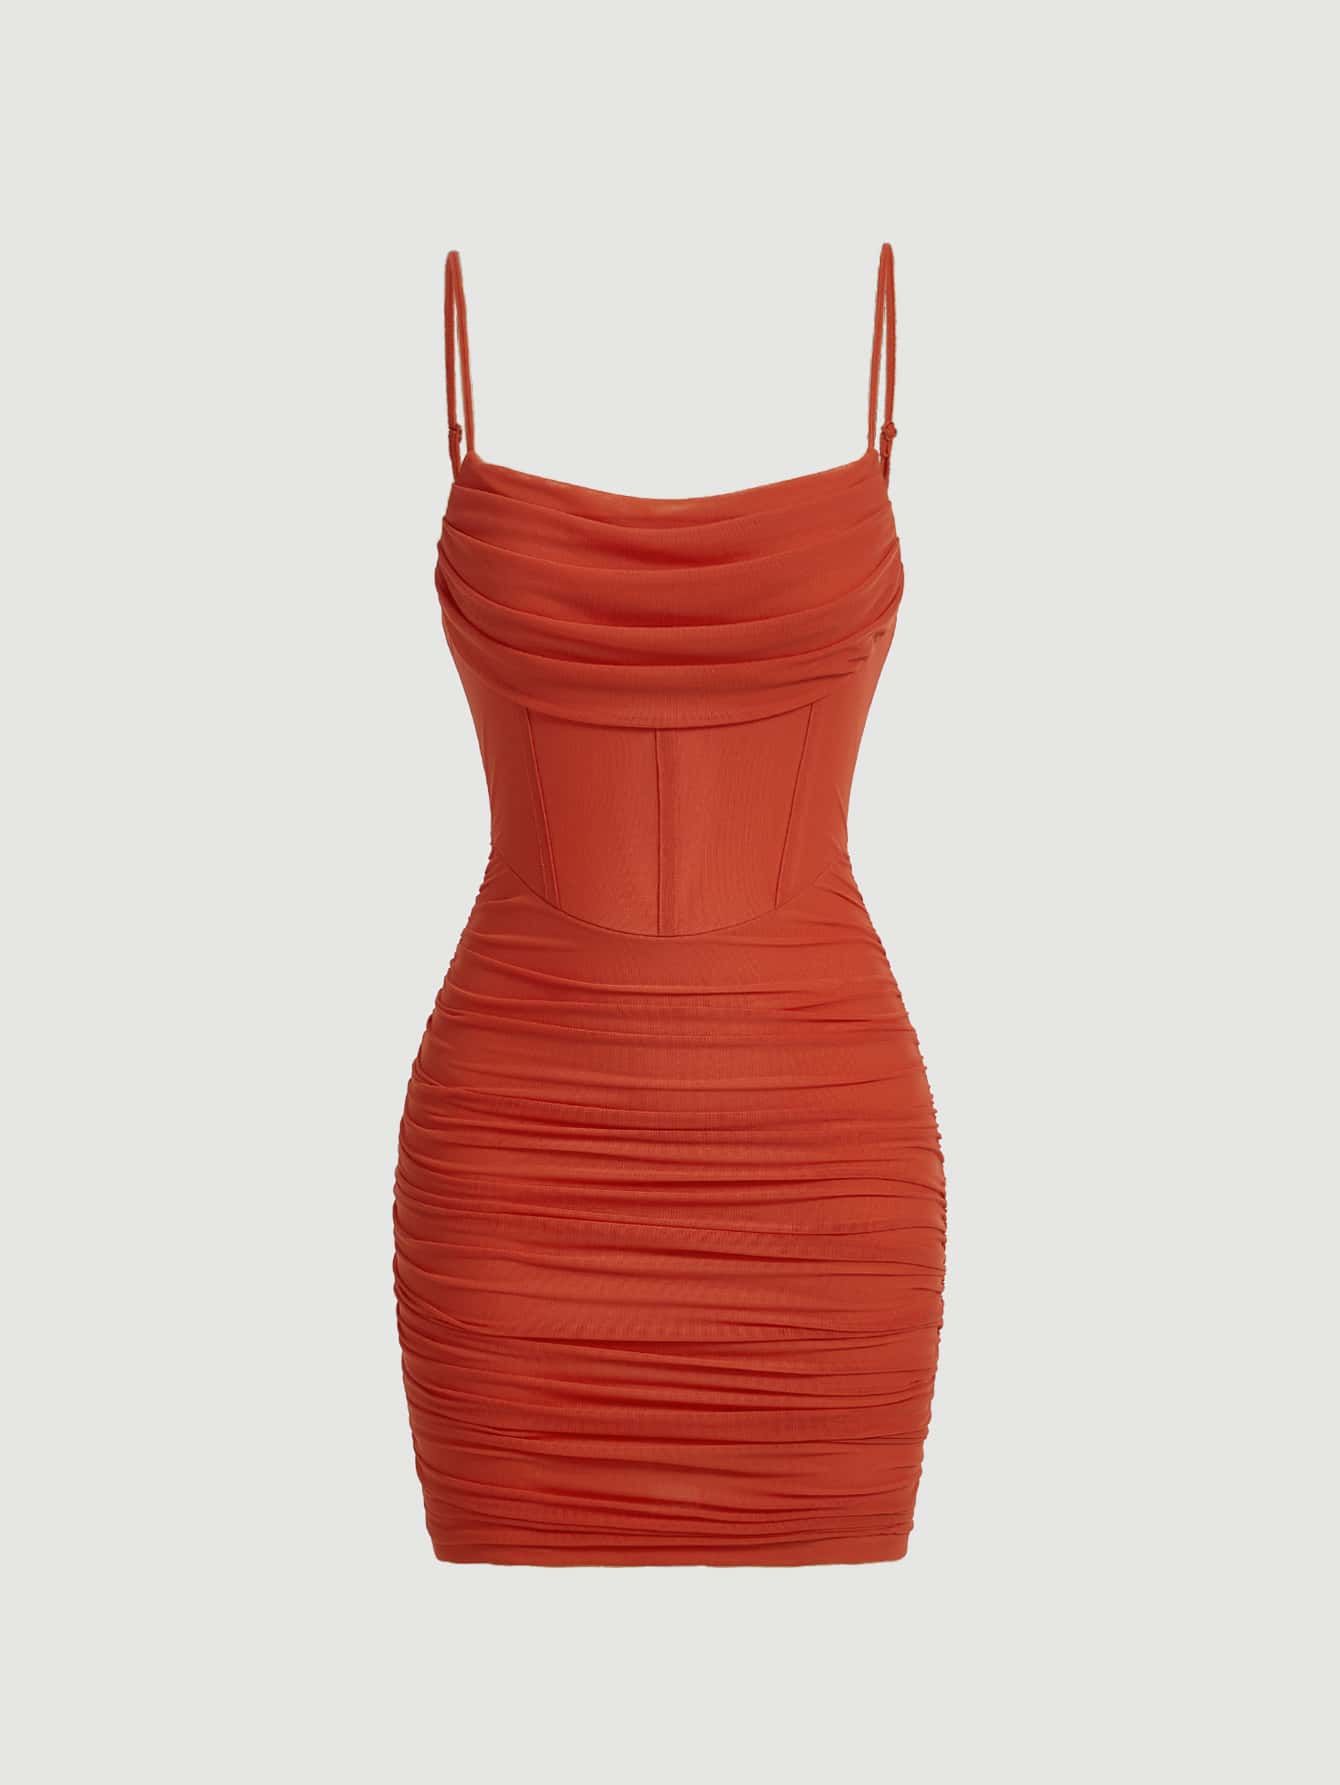 Vibrant in Orange: Styling with the Orange Dress